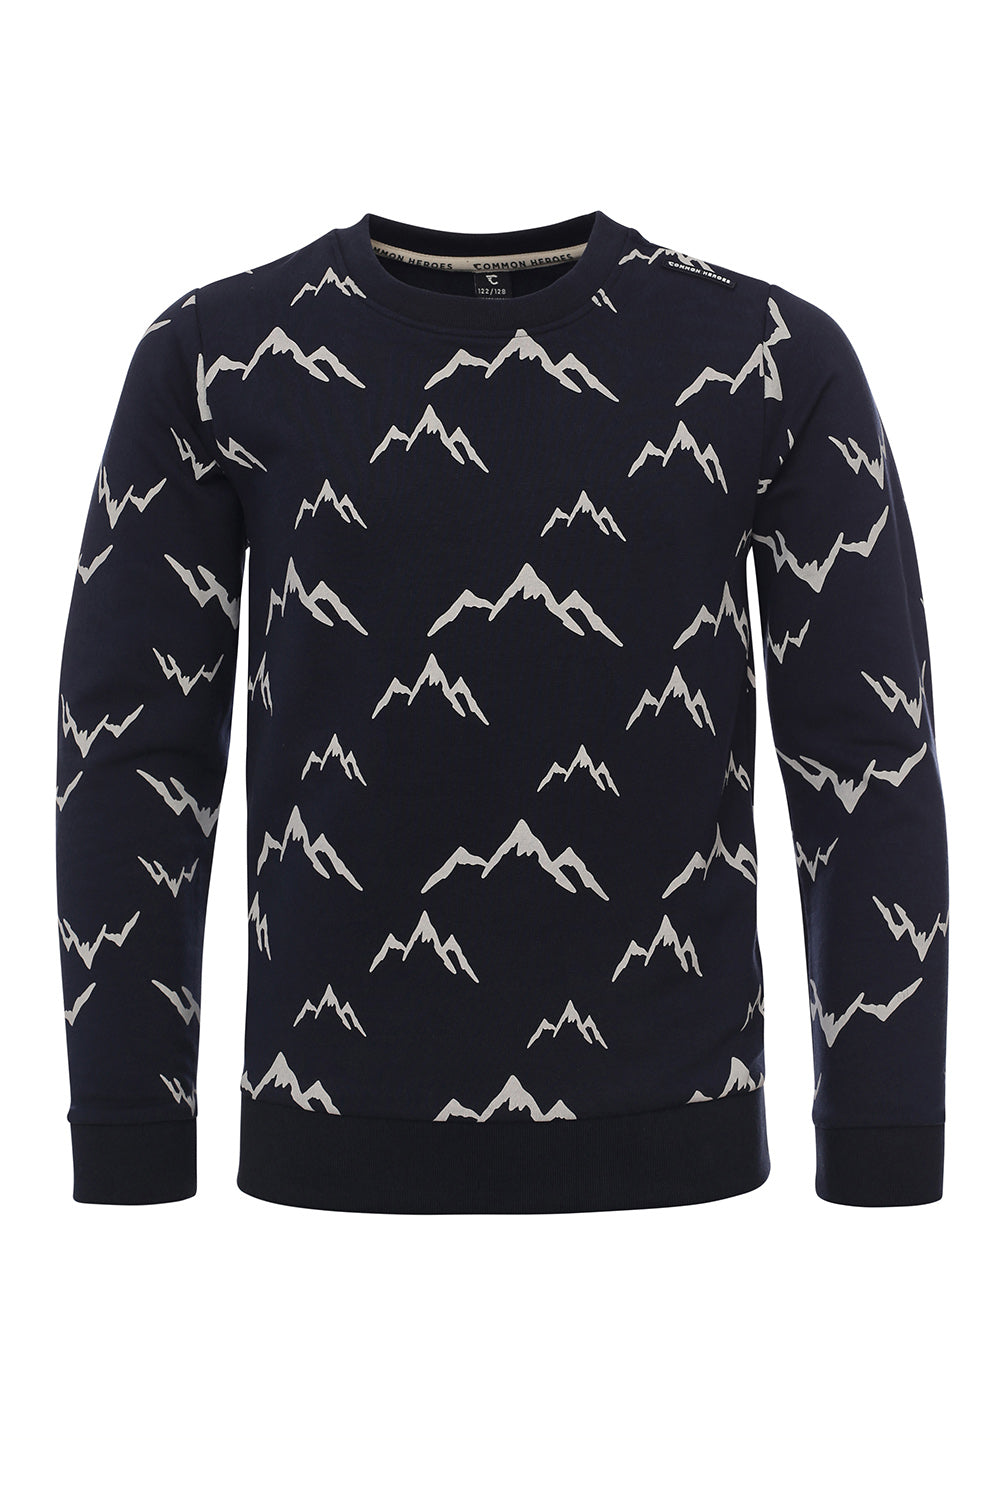 Common Heroes Mountain Sweater